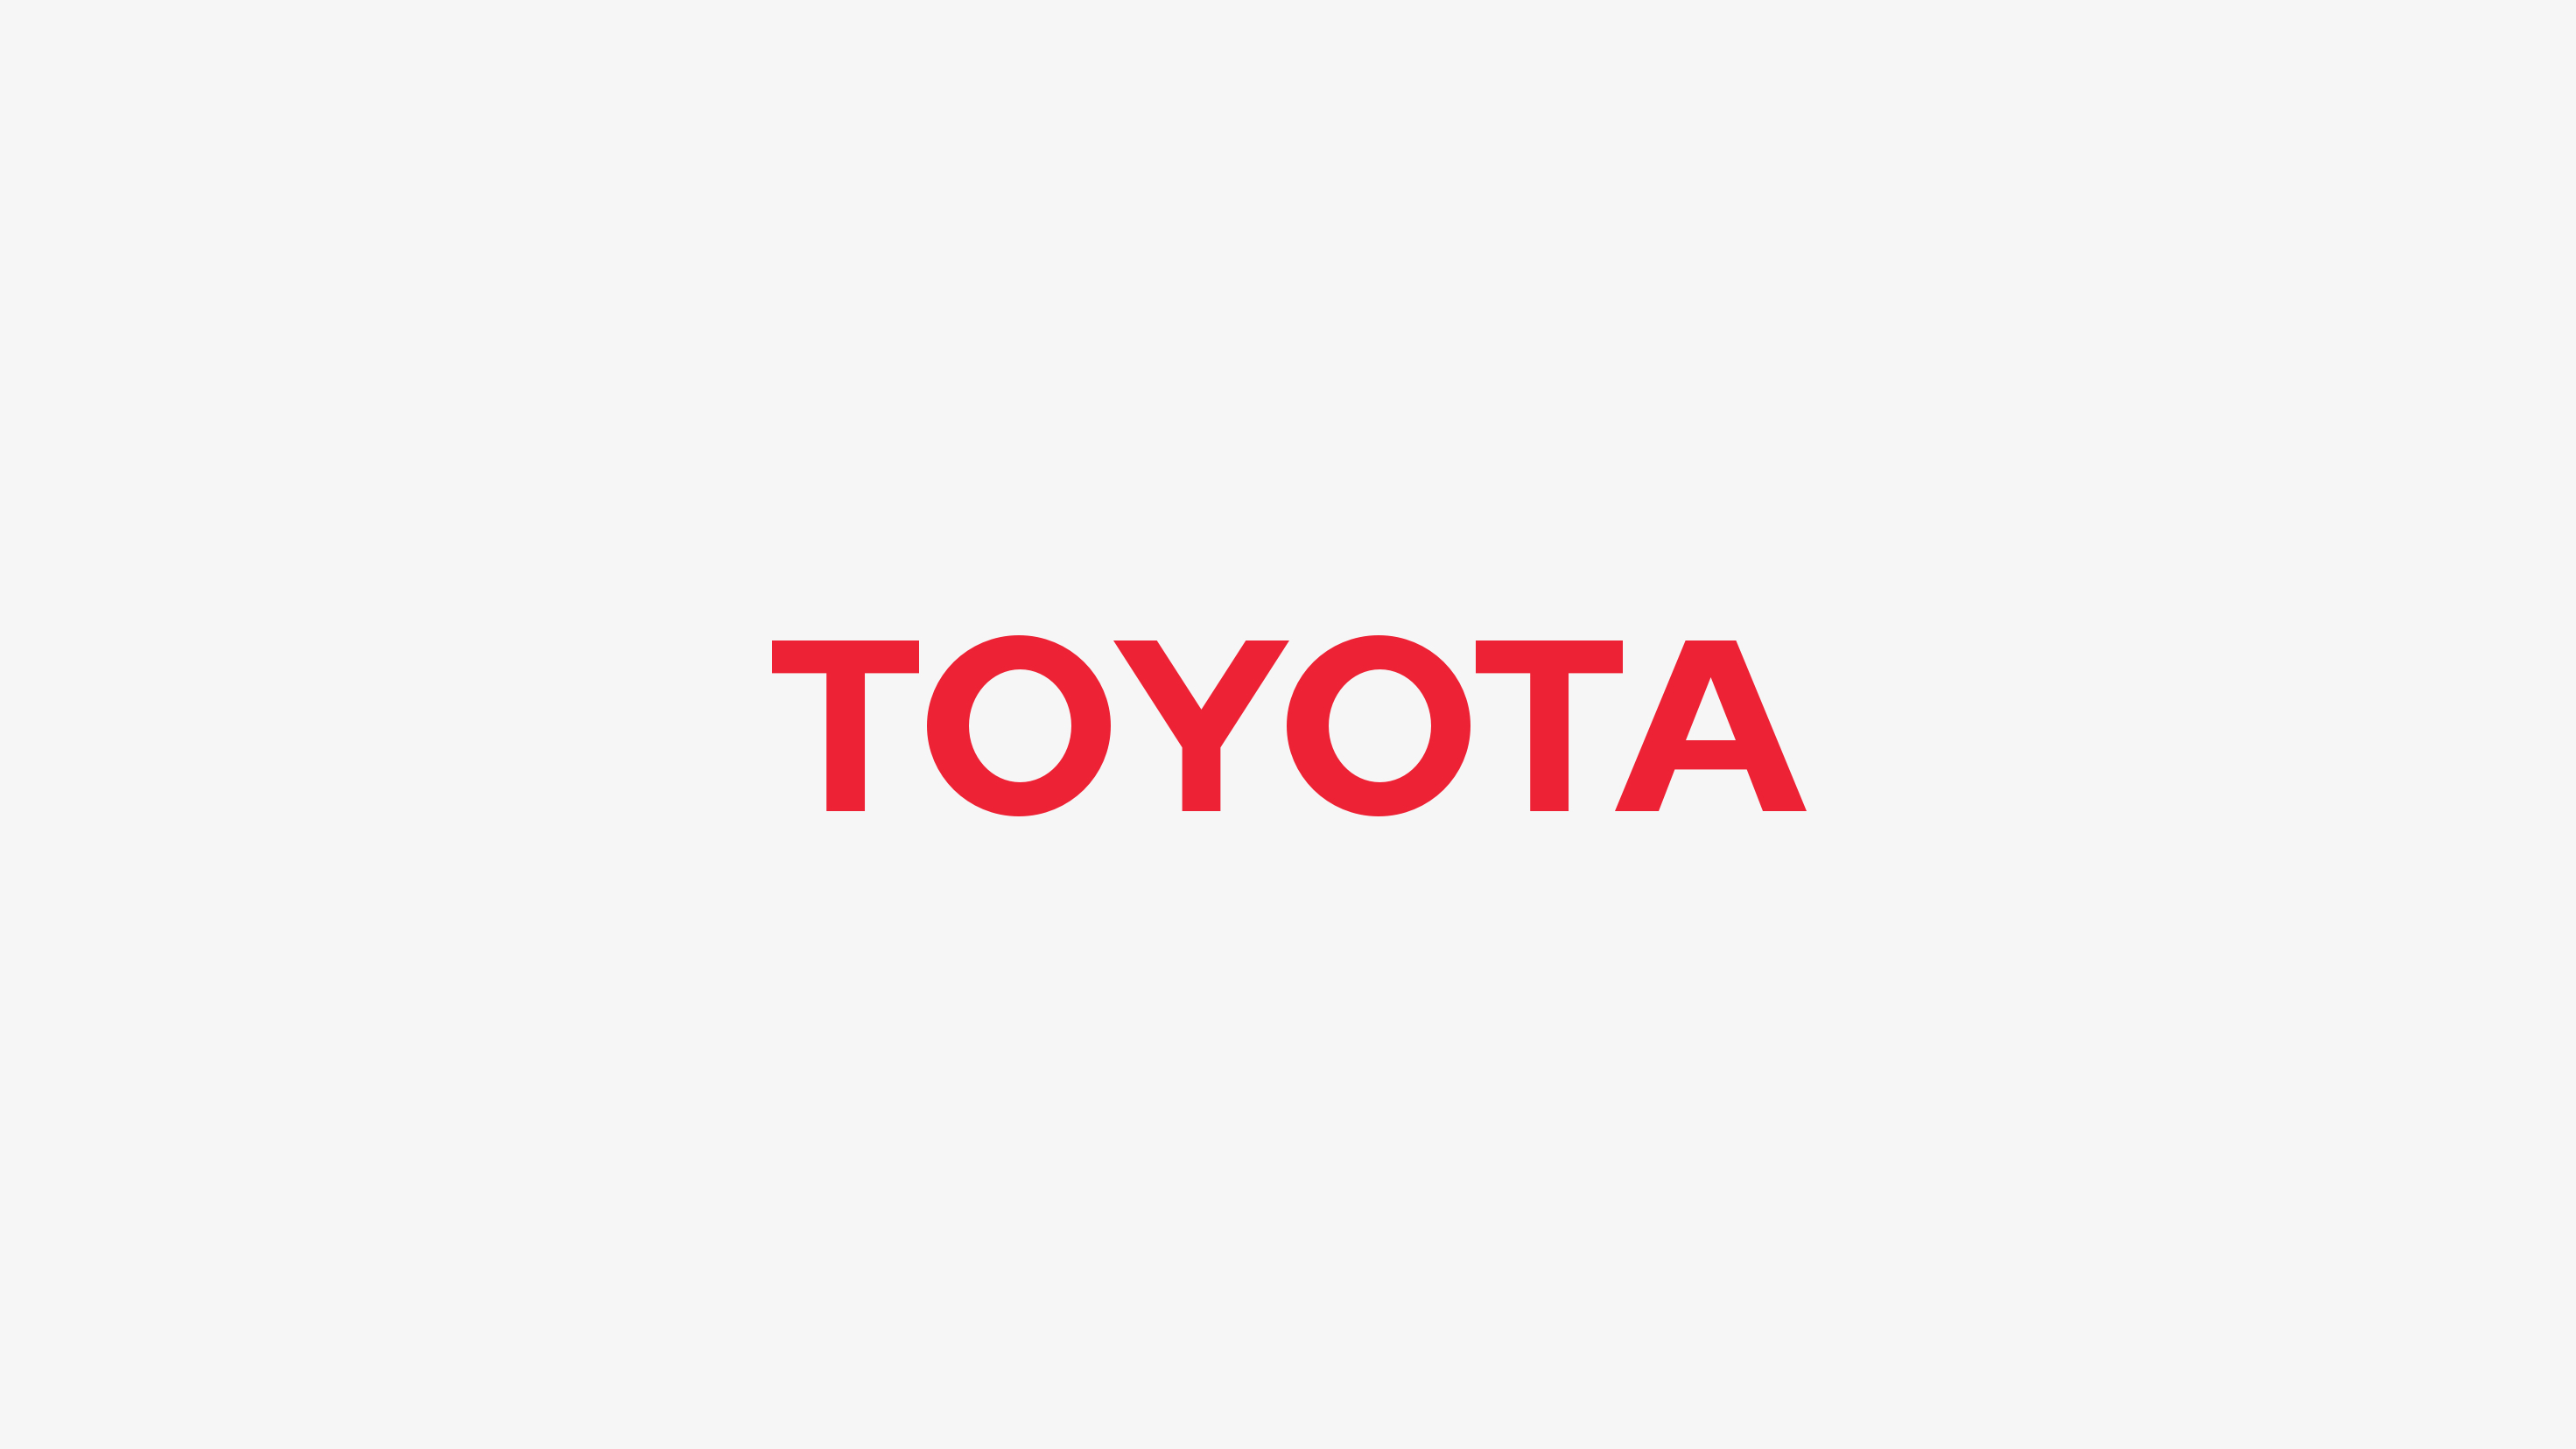 2015 Toyota North American Environmental Report – Toyota Improving Water Quality and Local Habitats